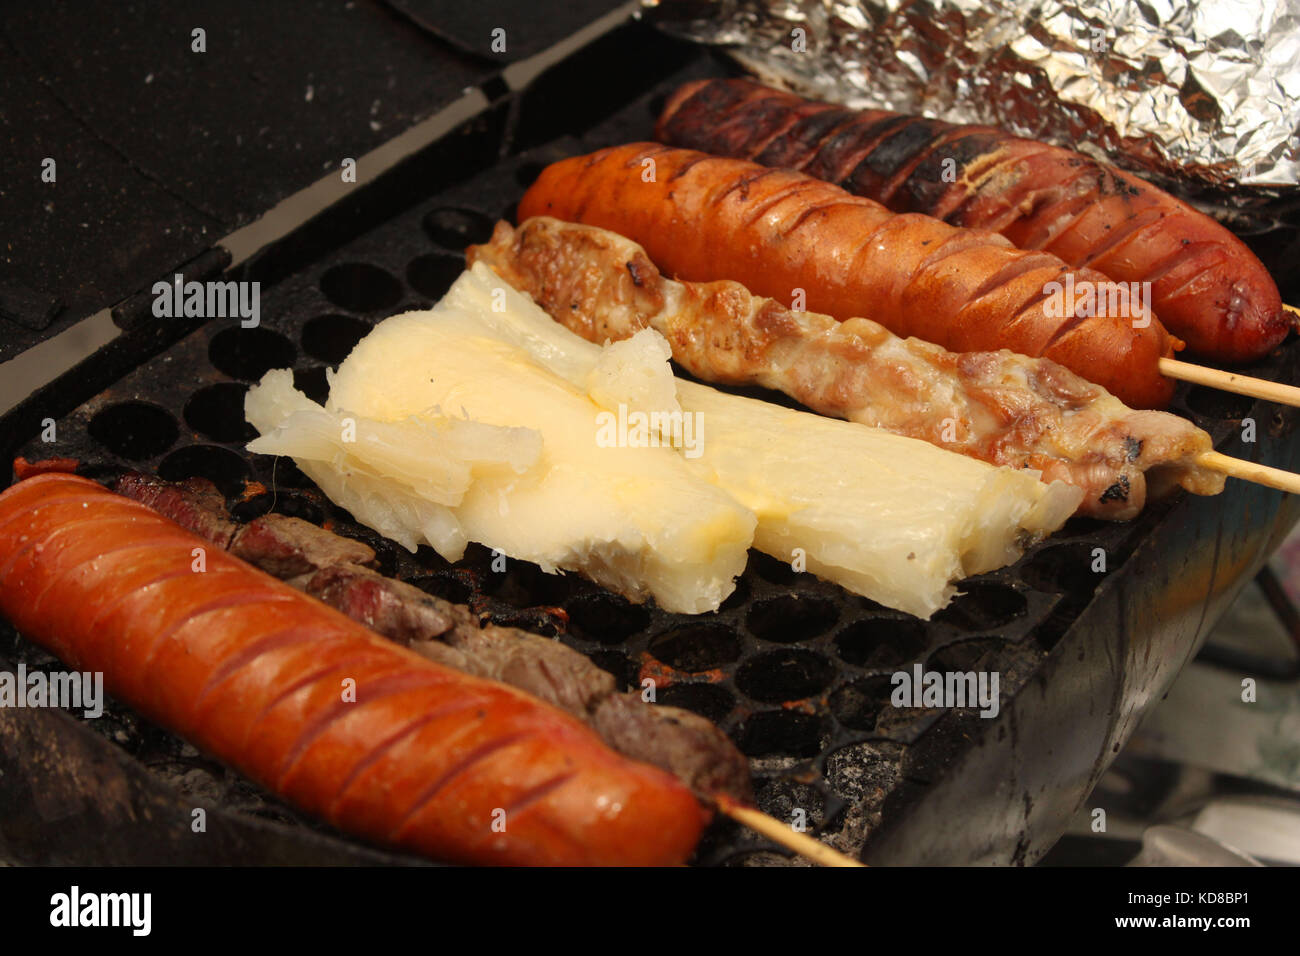 Small street vendor in Rio de Janeiro: grilled sausage, beef, chicken and cassava Stock Photo